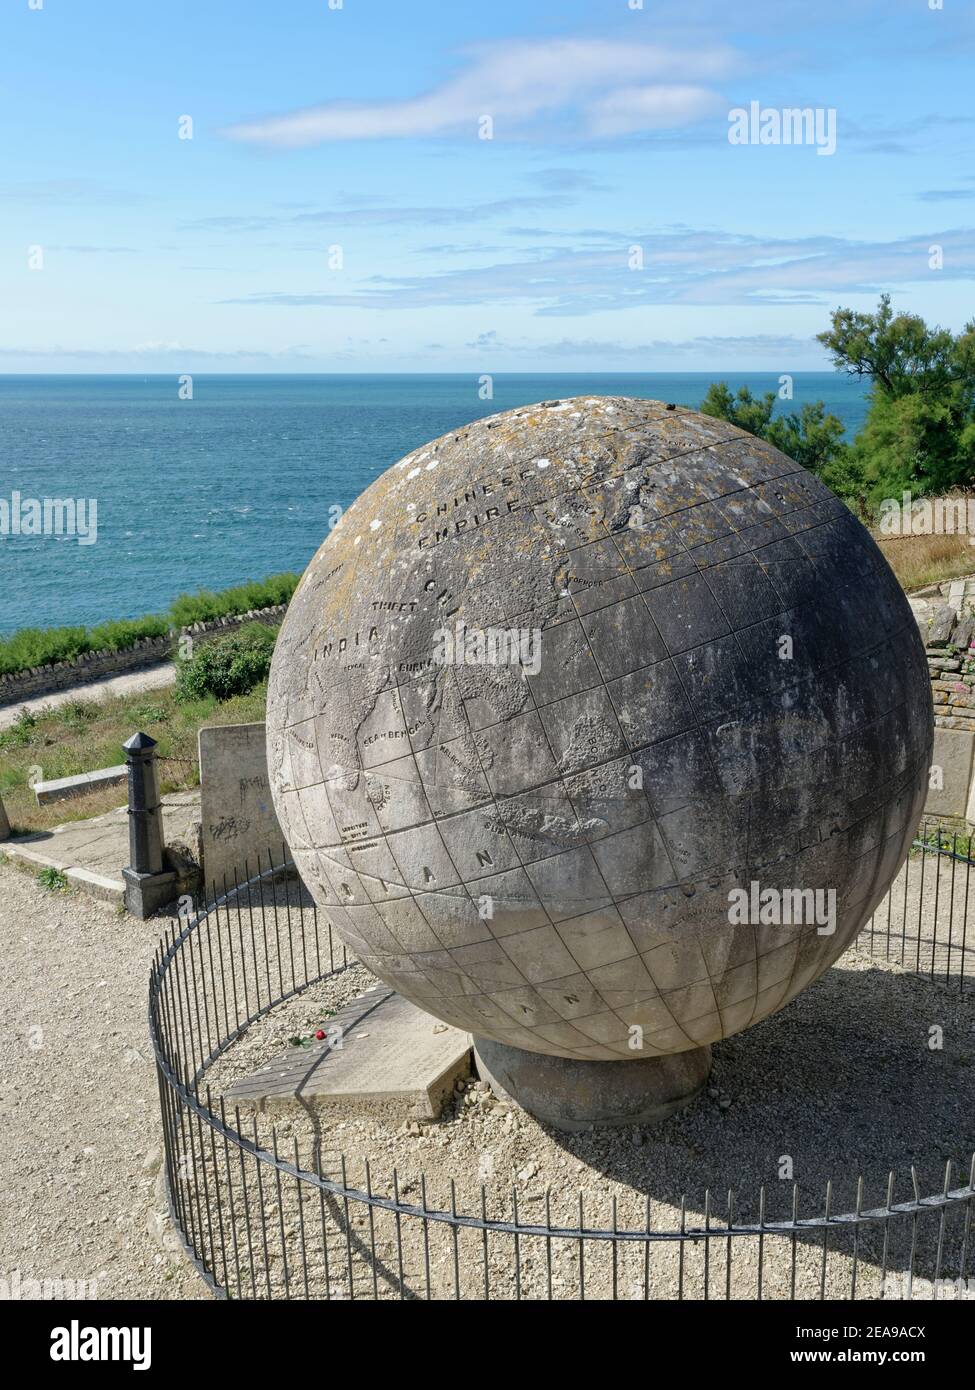 The Great Globe, a 40 ton Portland stone globe with a map of the world carved on the surface, below Durlston Castle, Durlston Head, Swanage, Dorset UK Stock Photo